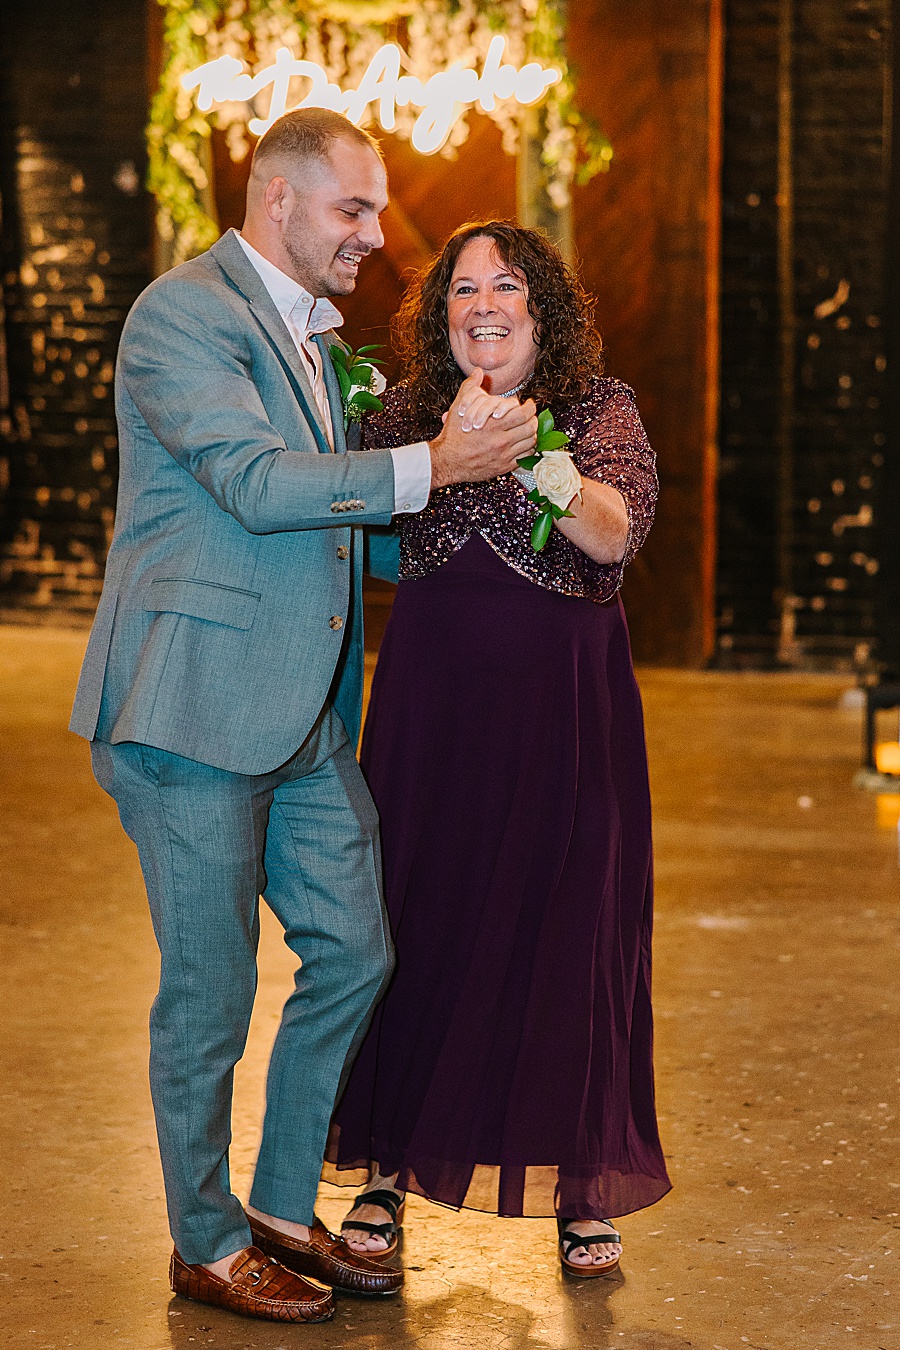 Groom & Mom dancing at reception at Jackson Terminal events wedding in Knoxville TN by Mandy Hart Photo, Knoxville TN Wedding Photographer